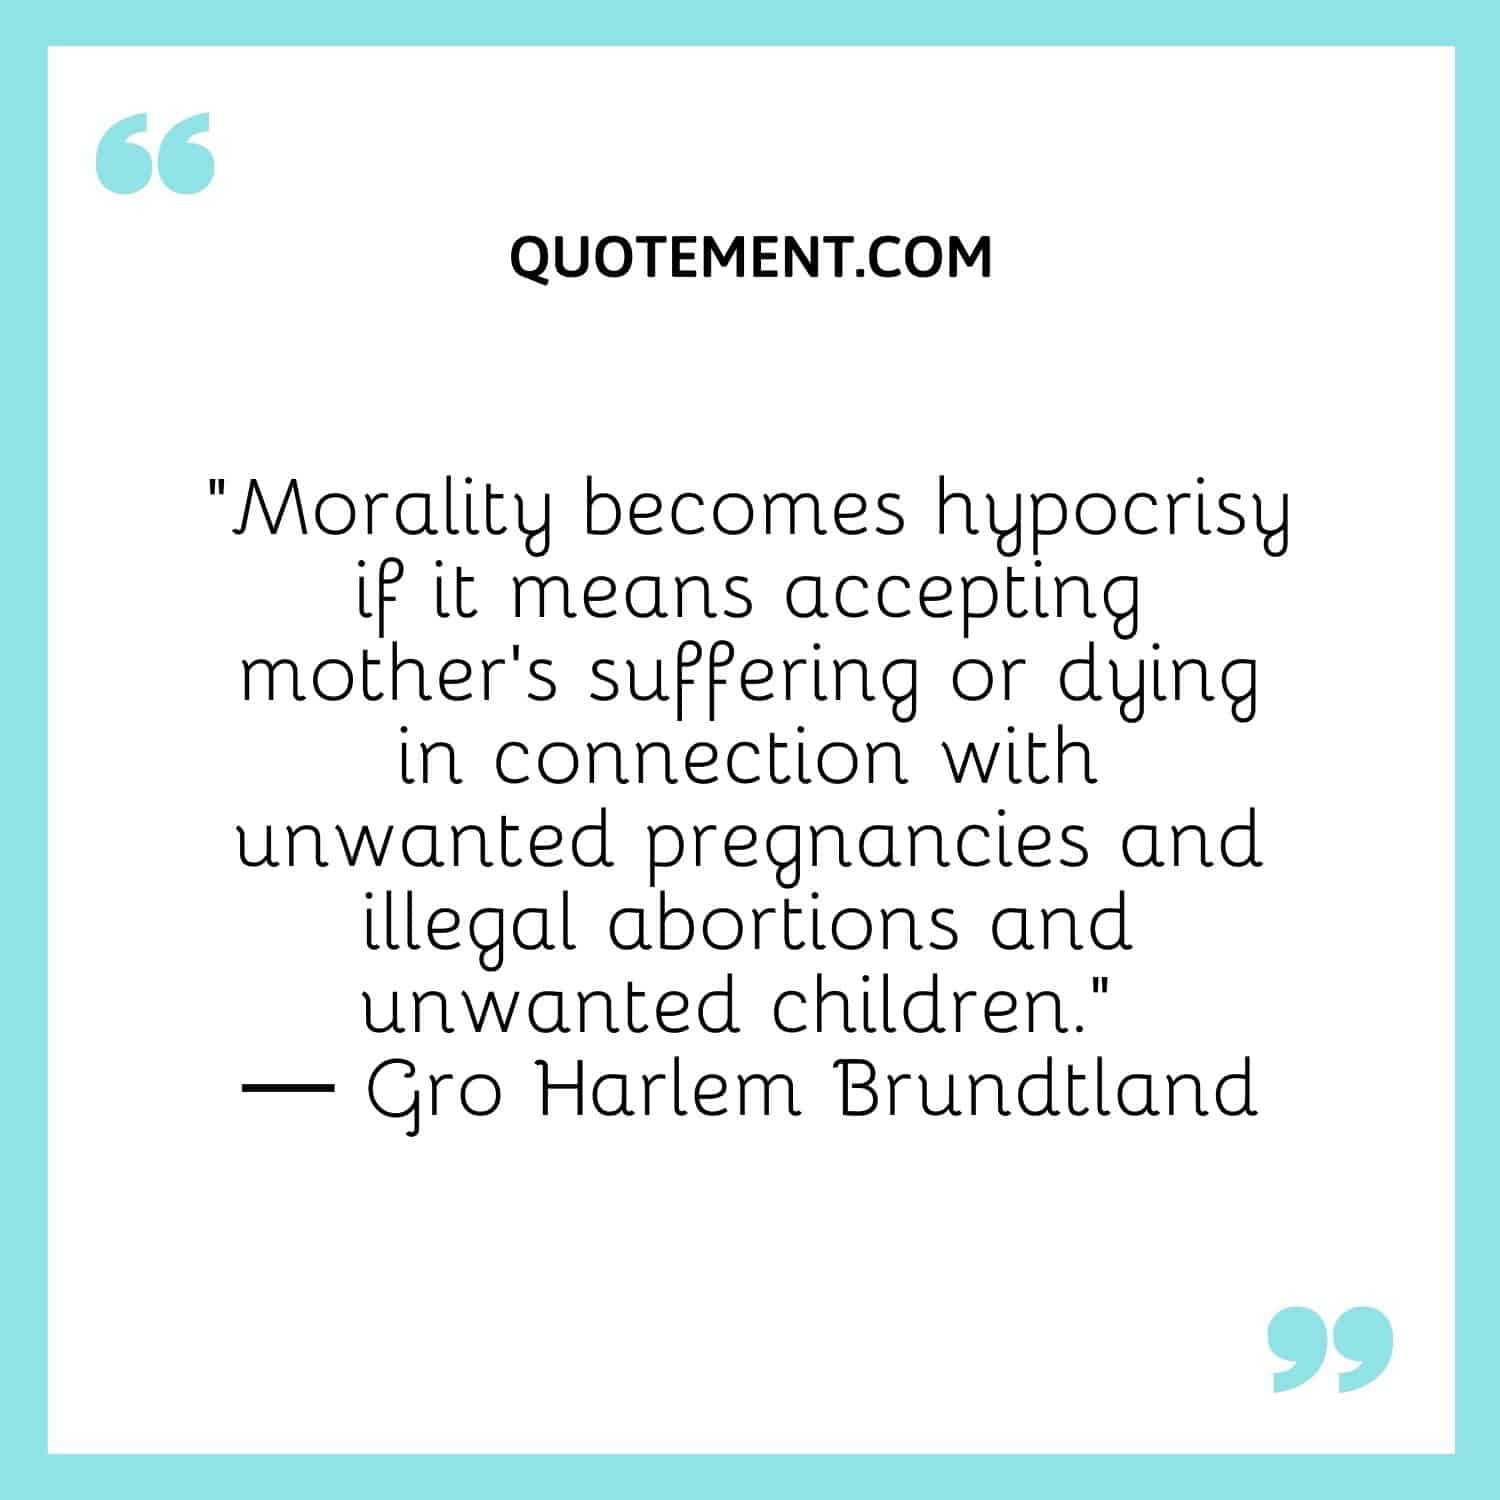 Morality becomes hypocrisy if it means accepting mother’s suffering